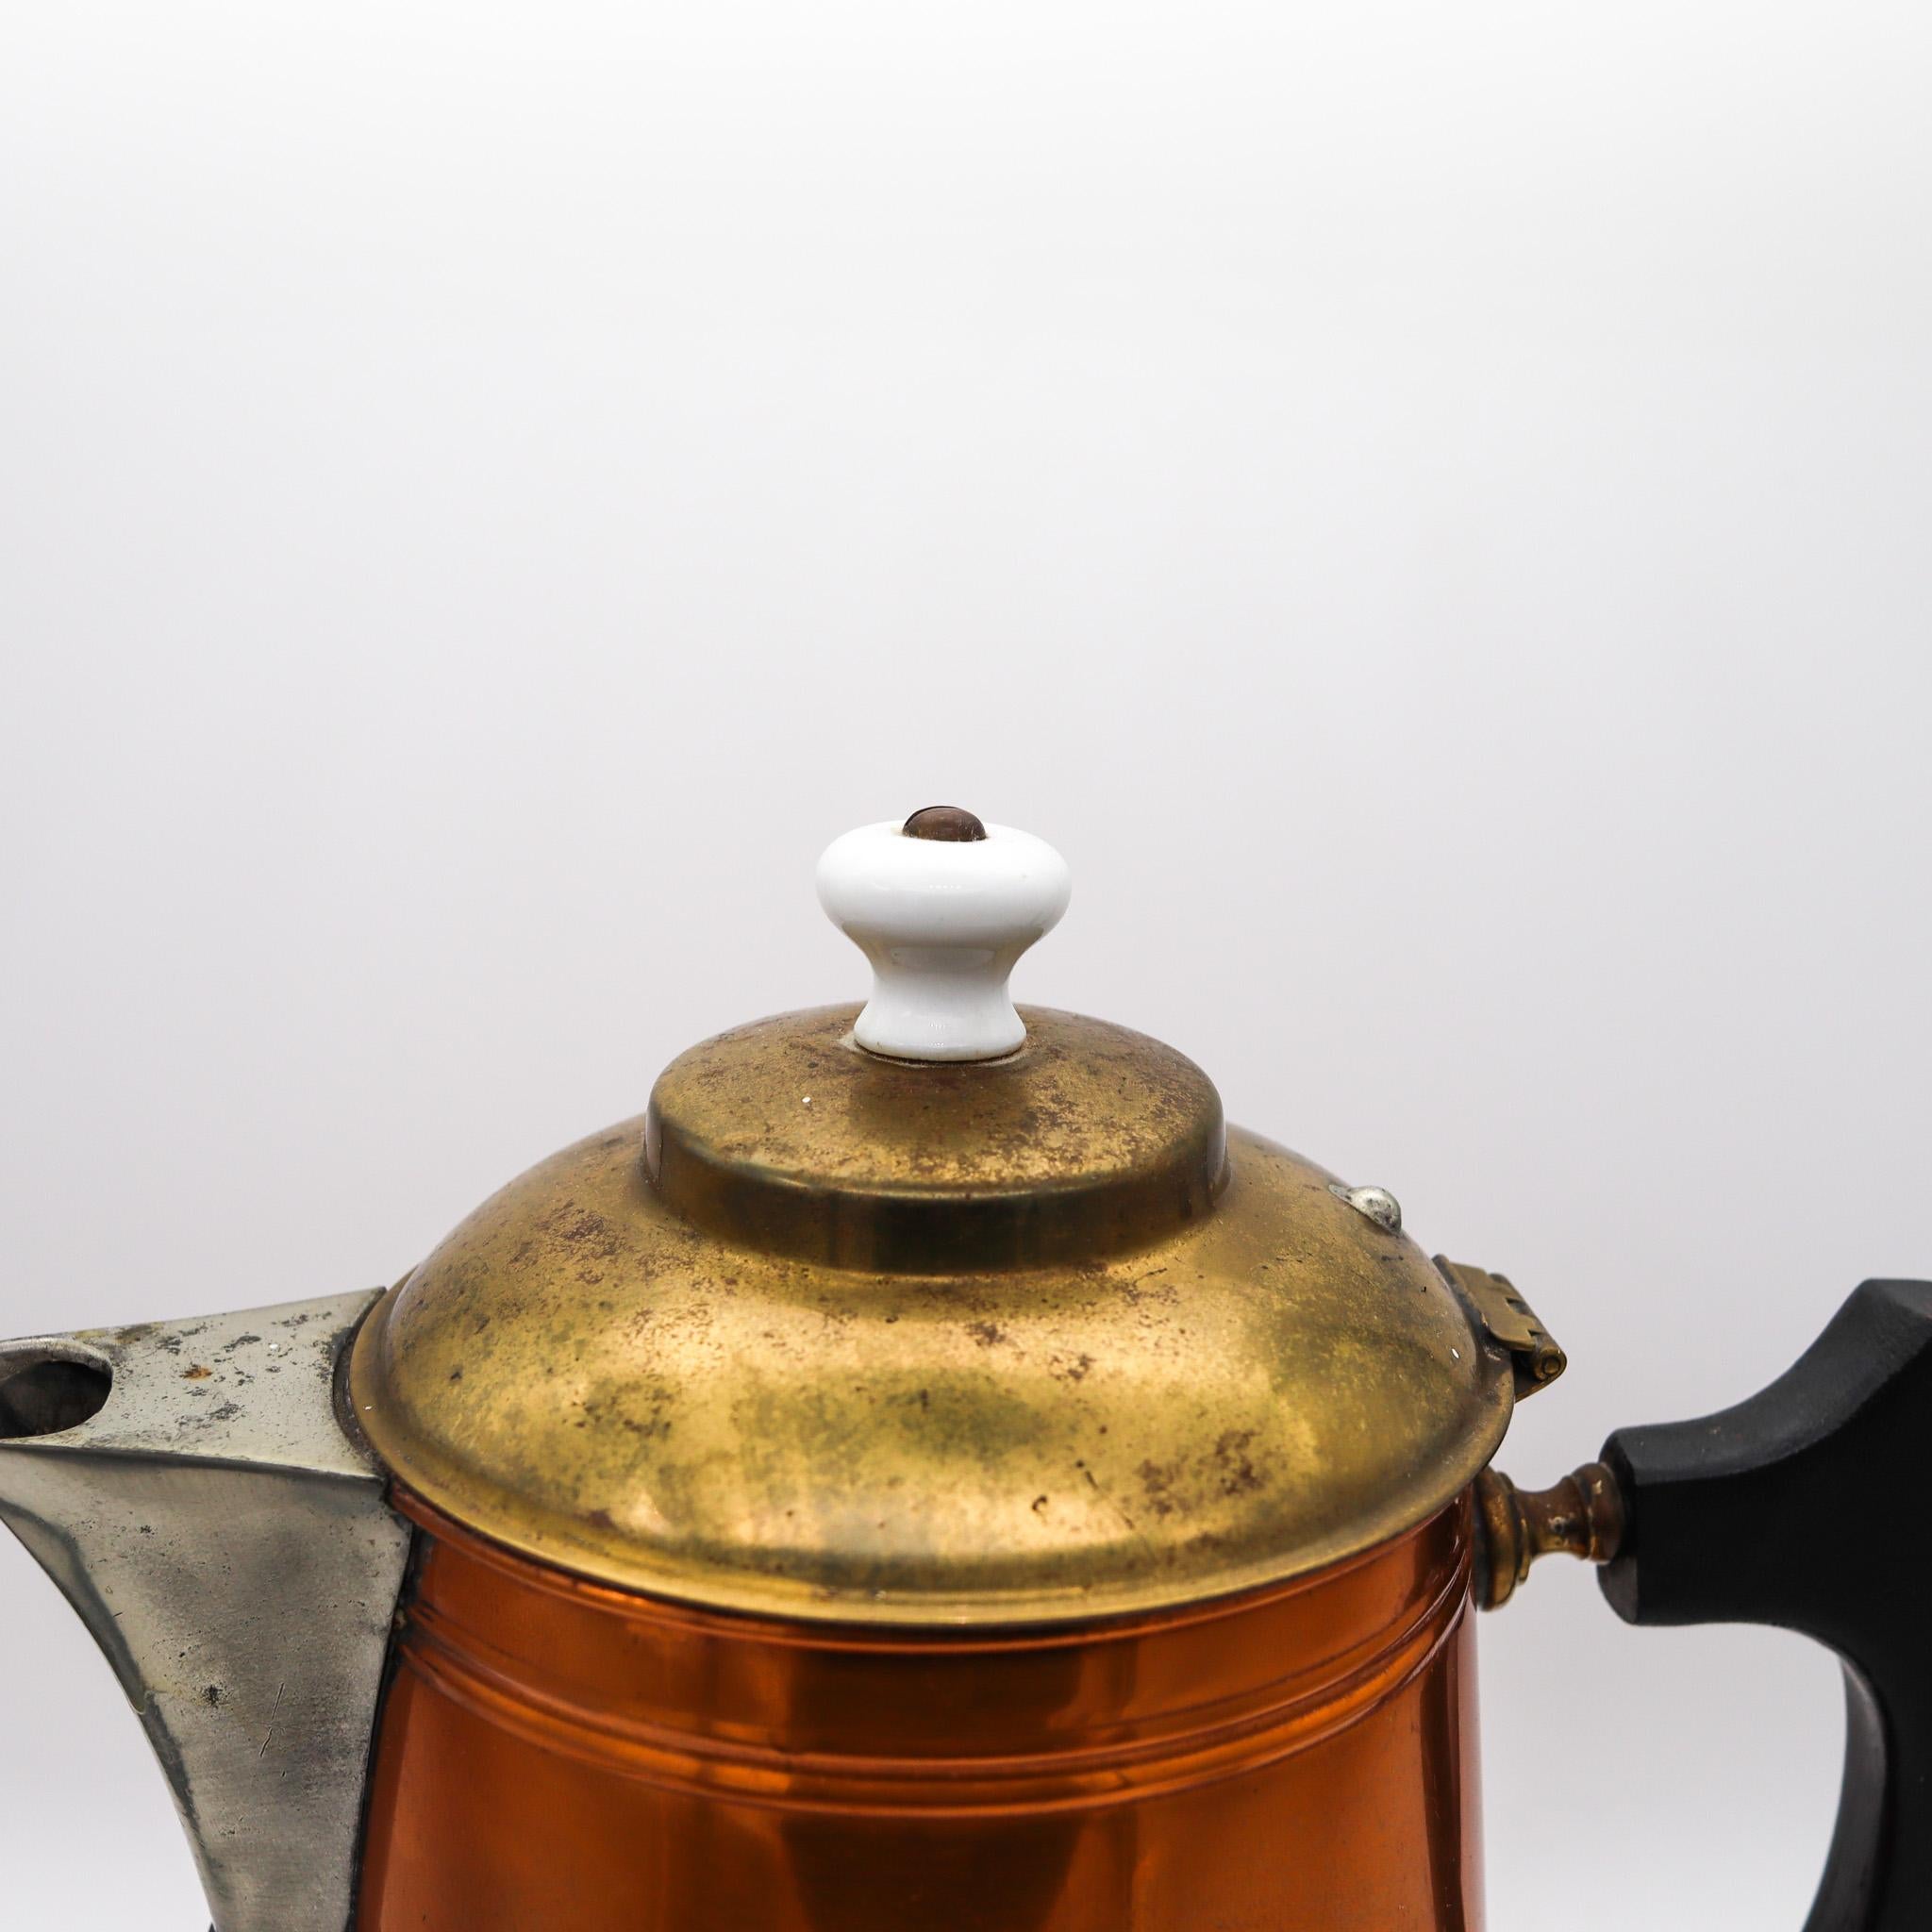 An industrial age pitcher designed by Manning Bowman Co.

A industrial age pitcher-coffee/tea pot, created in Connecticut North America by the Manning Bowman Company, back in the late 1899. Crafted with streamlines patterns in copper, brass and